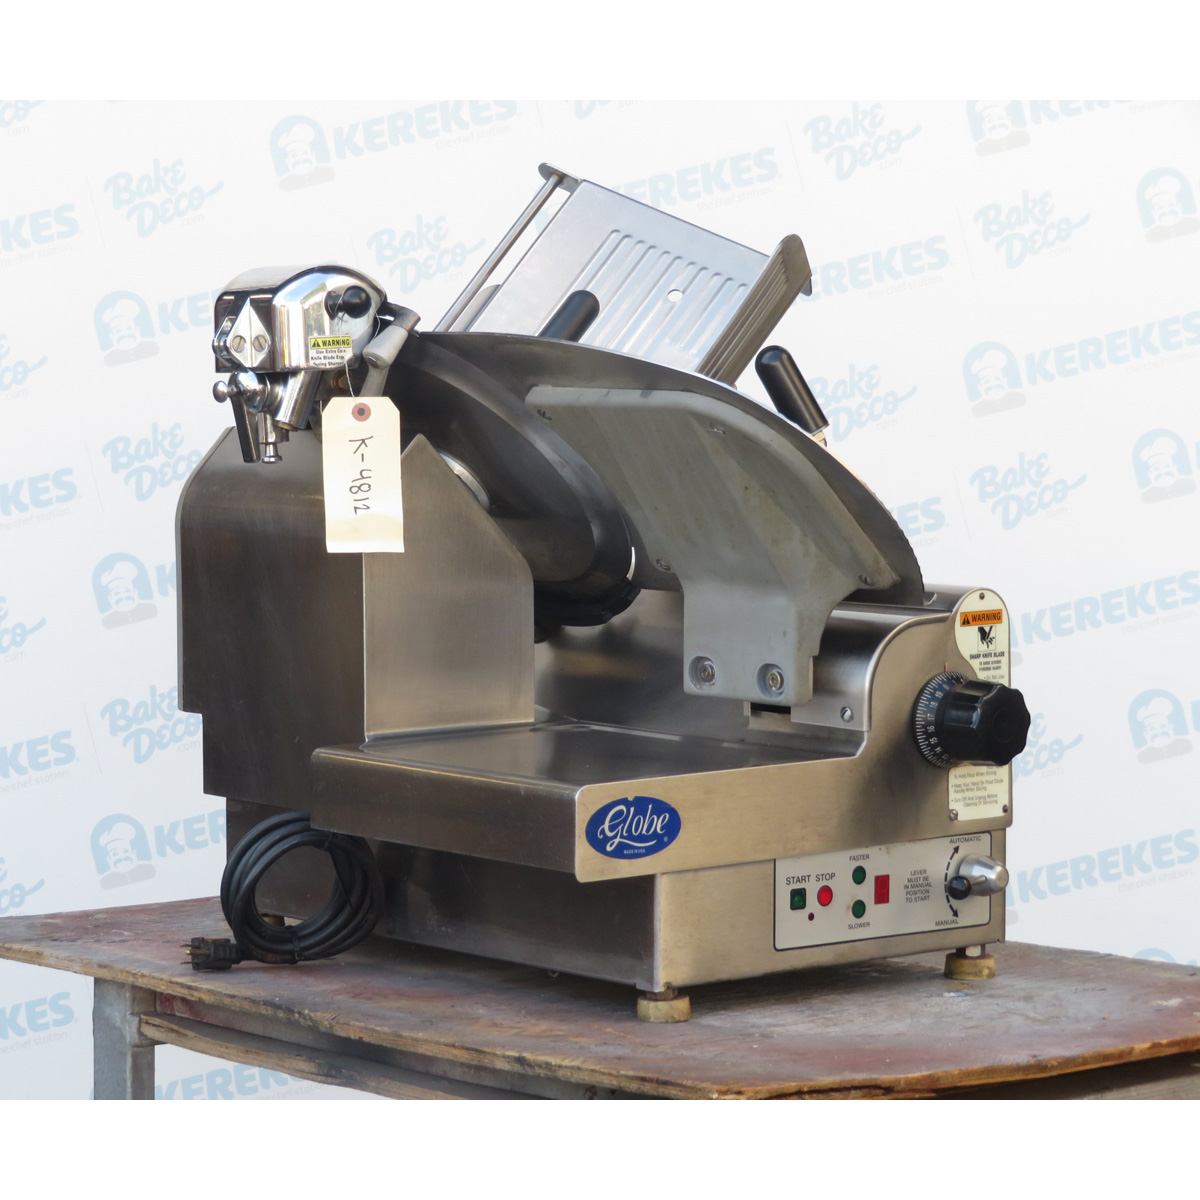 Globe 3850P Automatic Meat Slicer, Used Great Condition